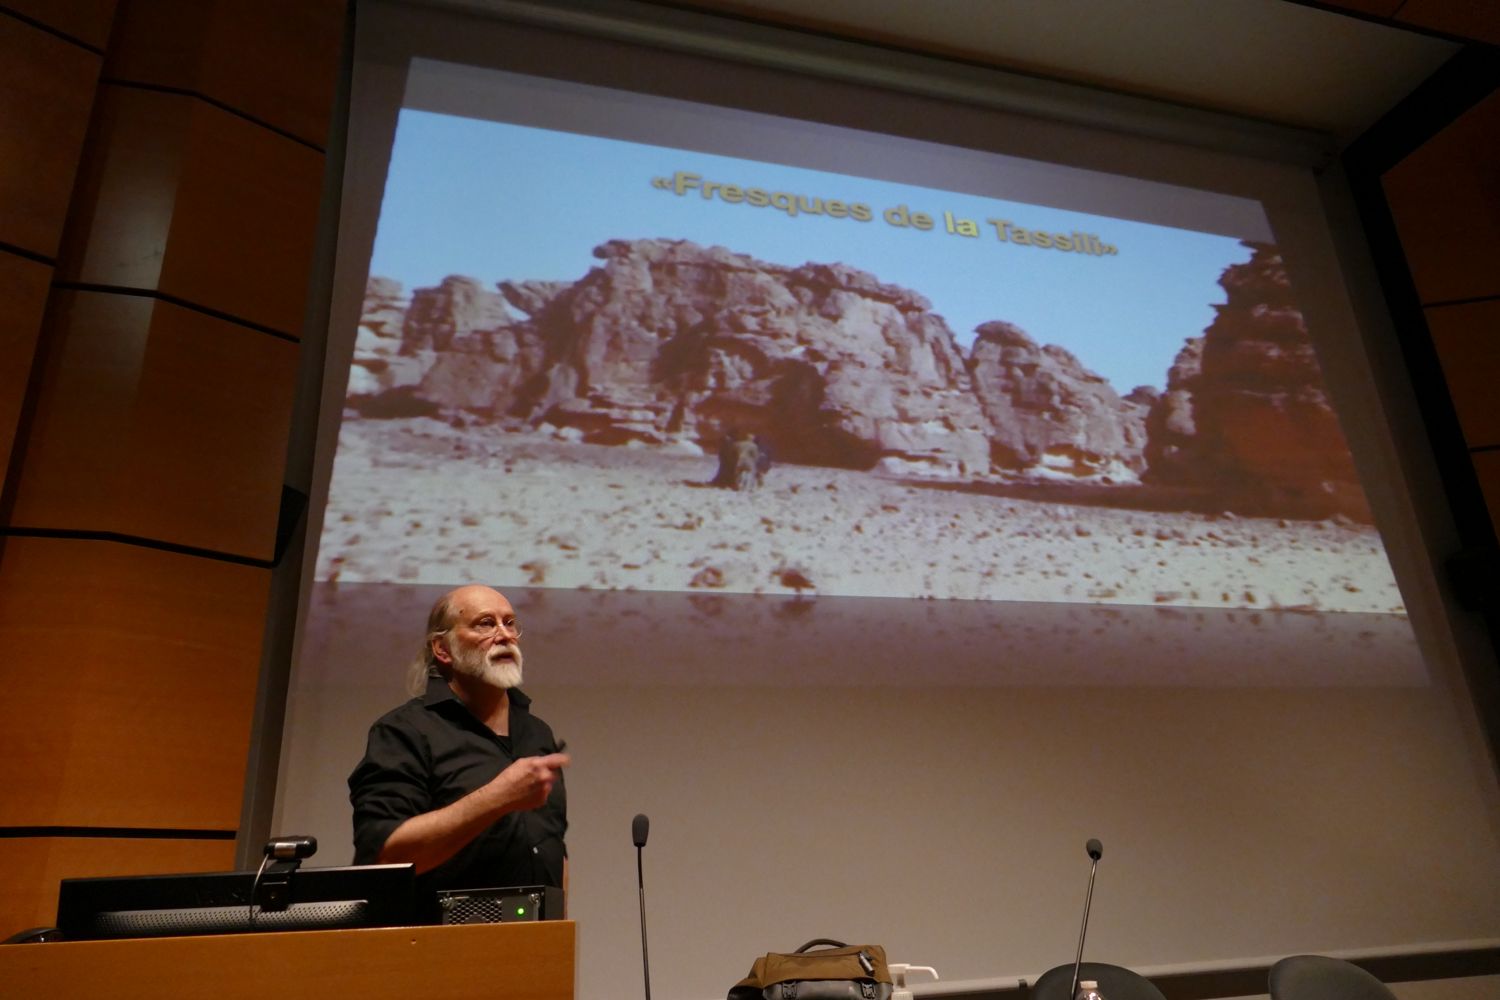 Jean-Loic Le Quellec, president of the Association of the Friends of Saharan Rock Art (AARS), presenting the elephantine erosion of the sandstone rocks in the present-day central Sahara.